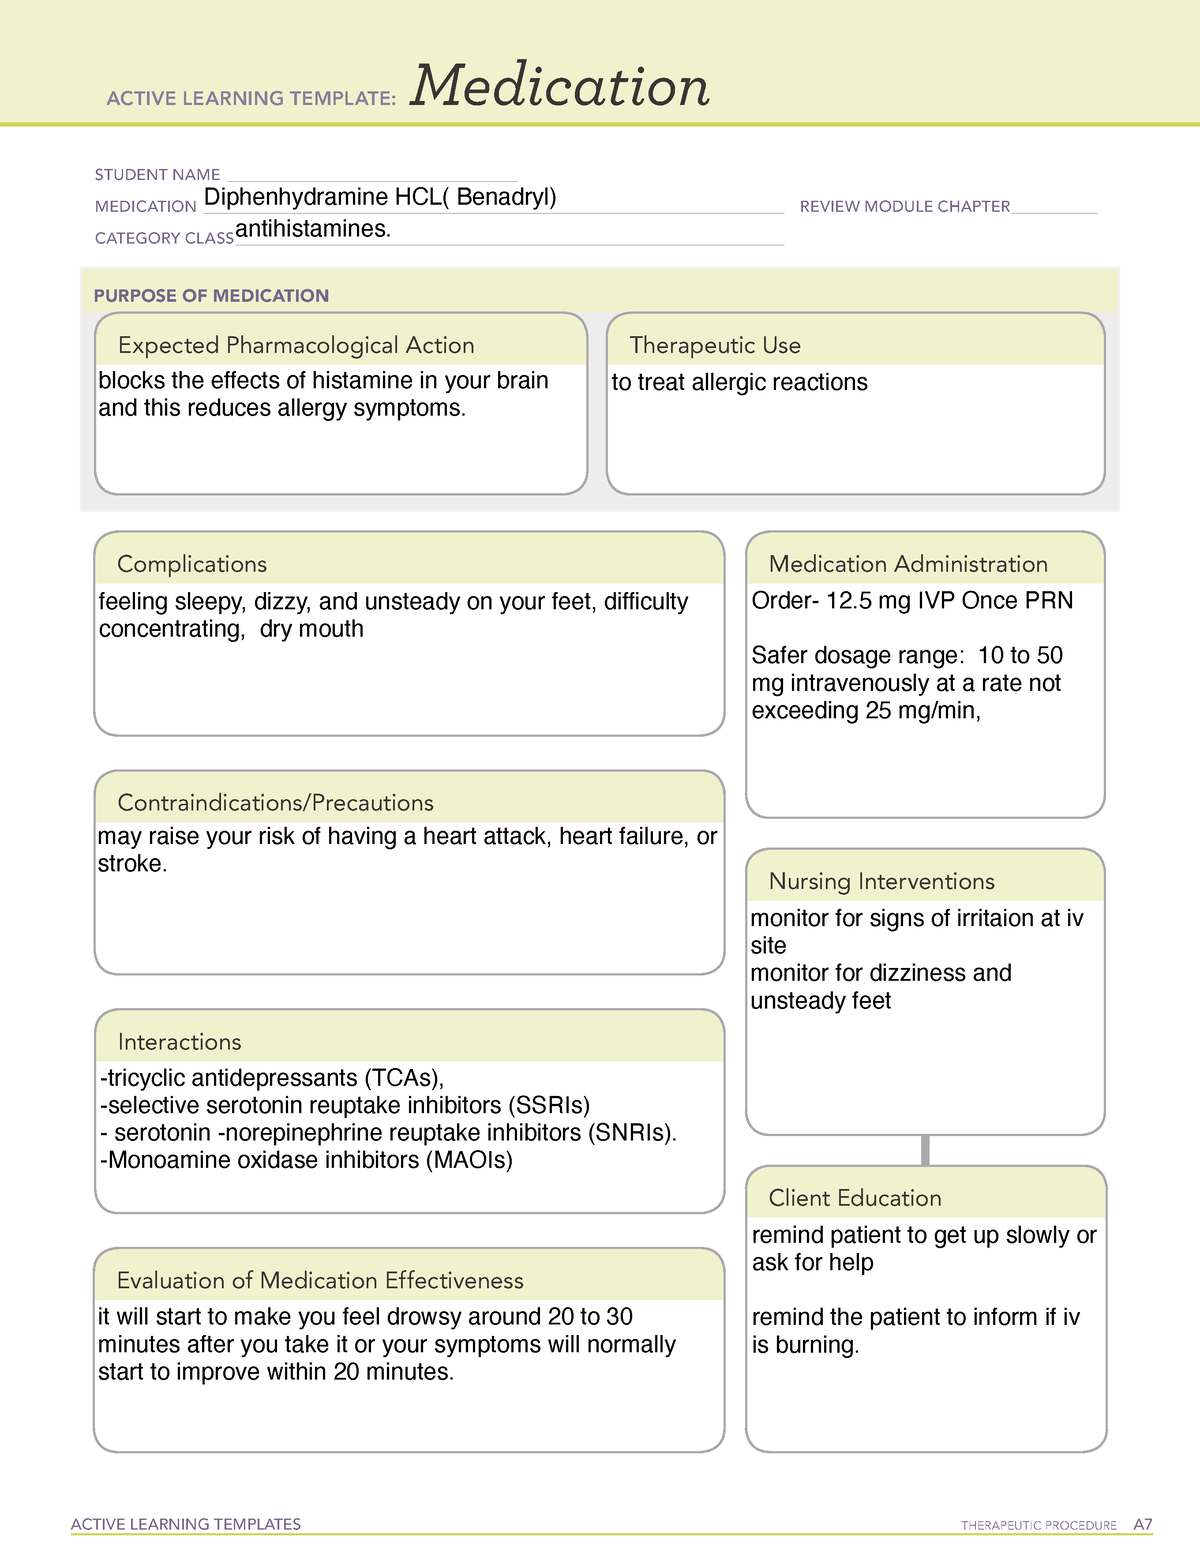 Diphenhydramine Medication card ACTIVE LEARNING TEMPLATES